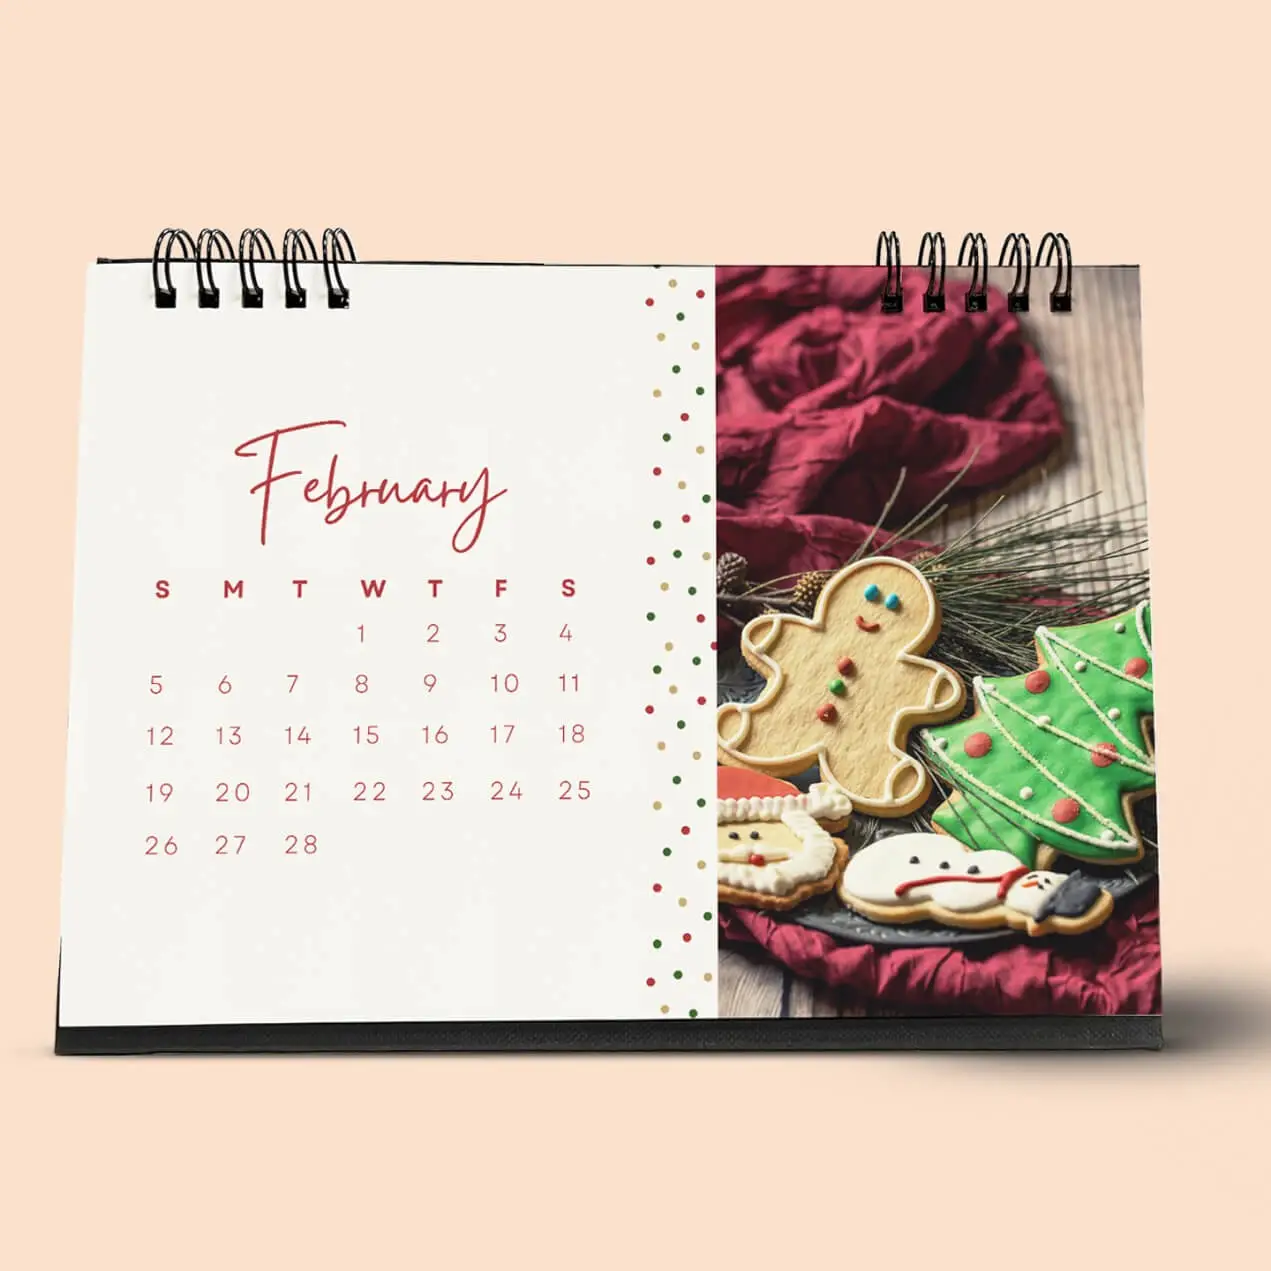 Express Delivery Personalized Desk Calendars 